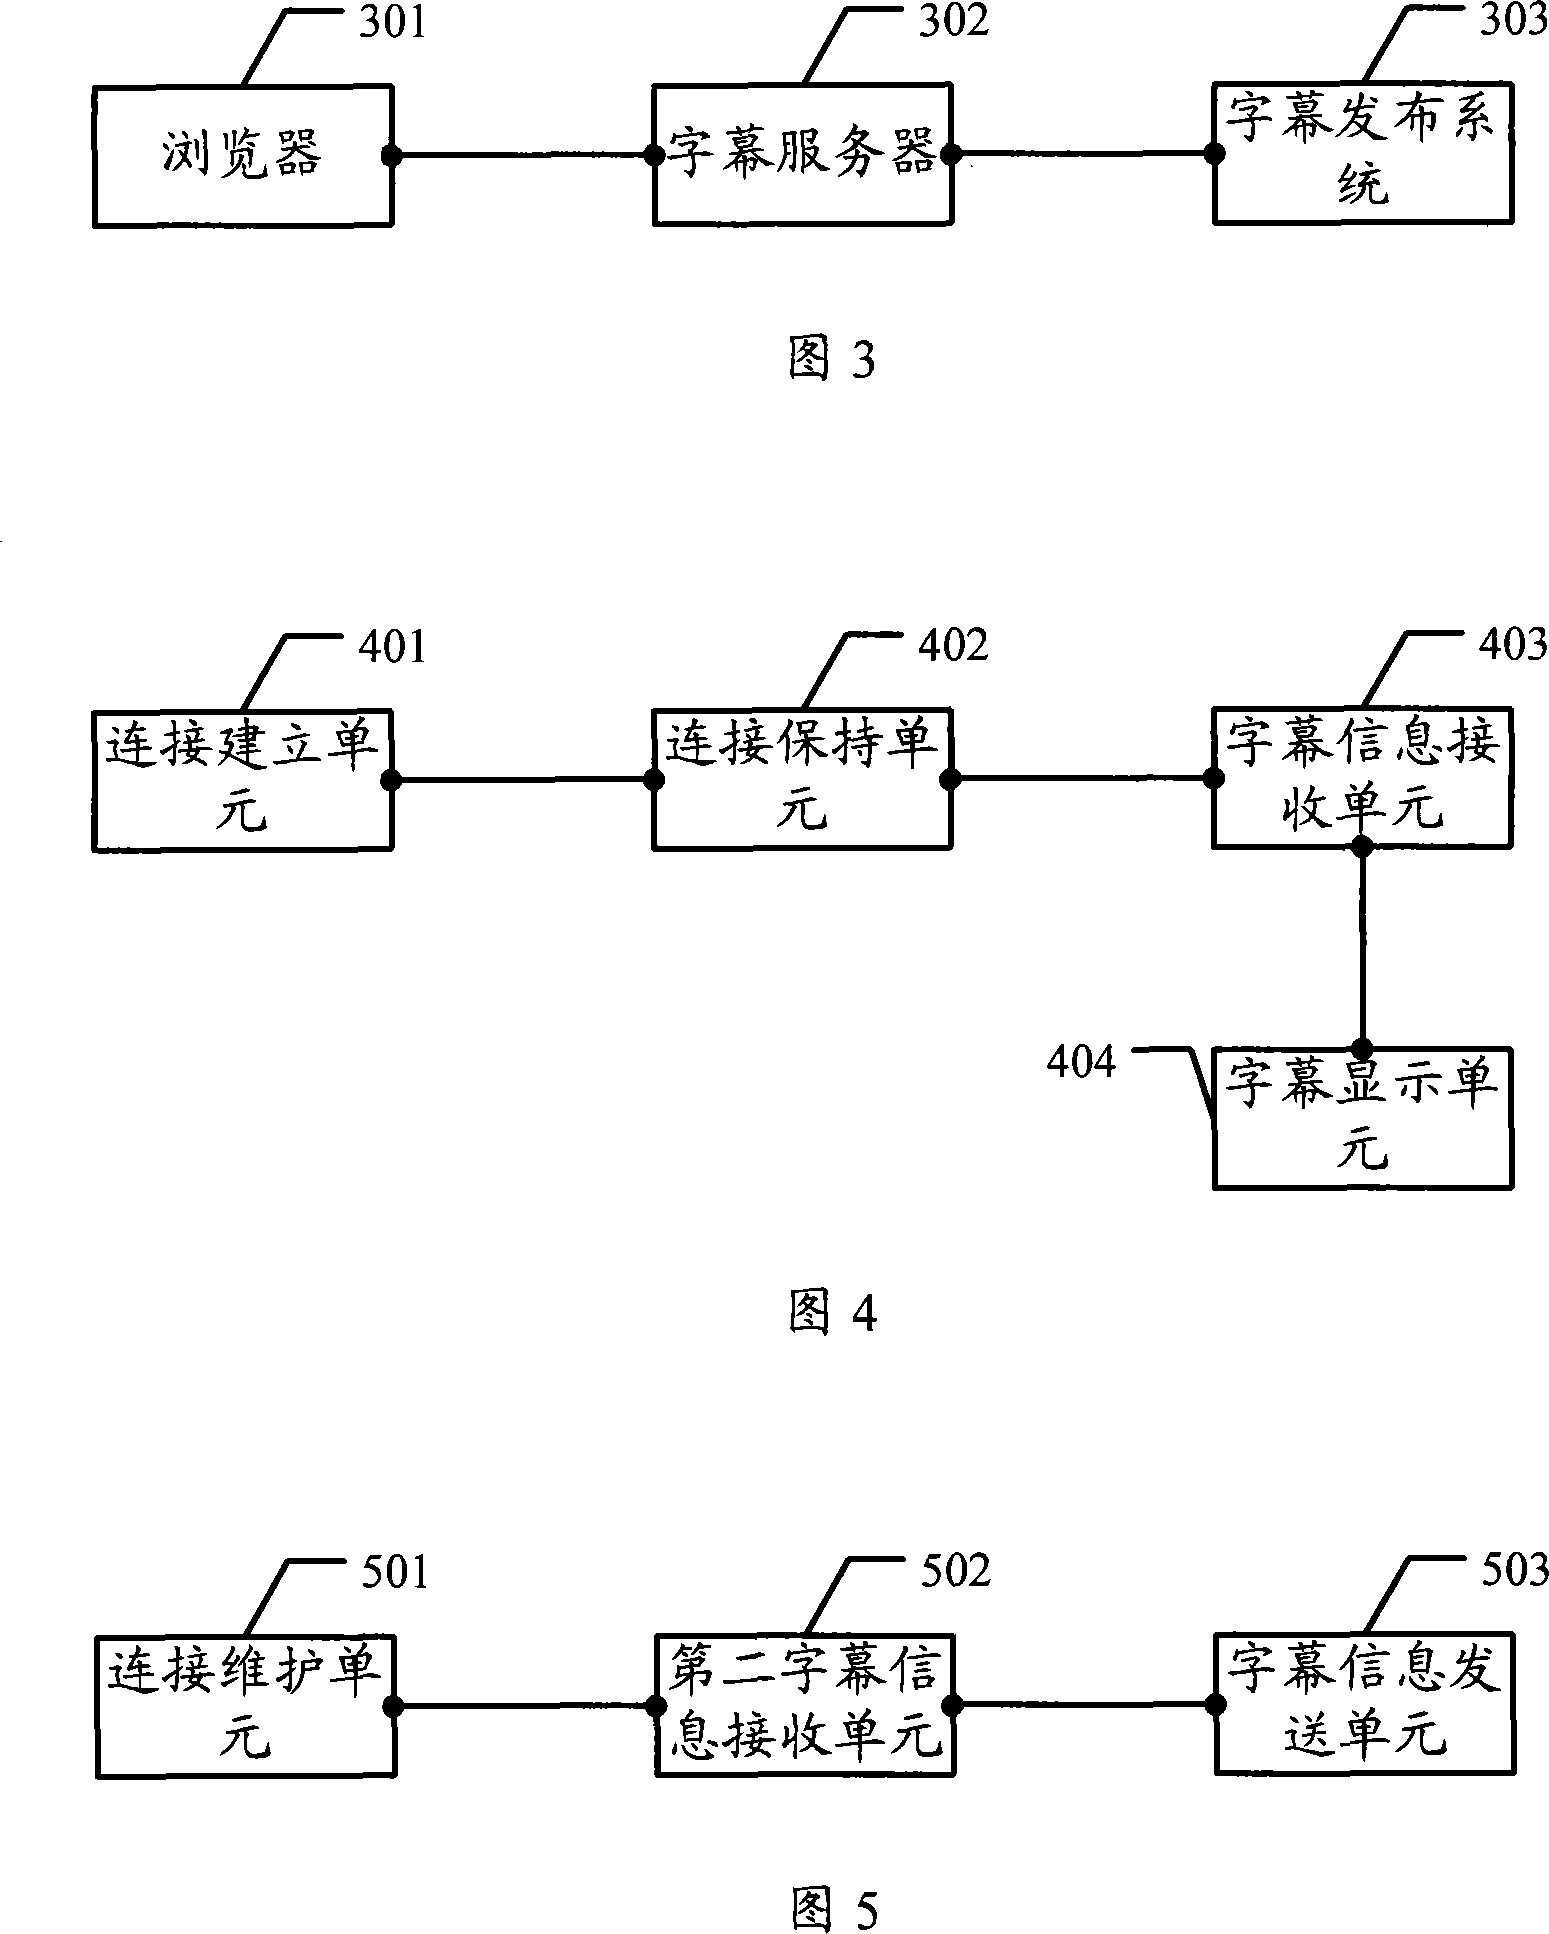 Subtitling display process and communication system and related equipment